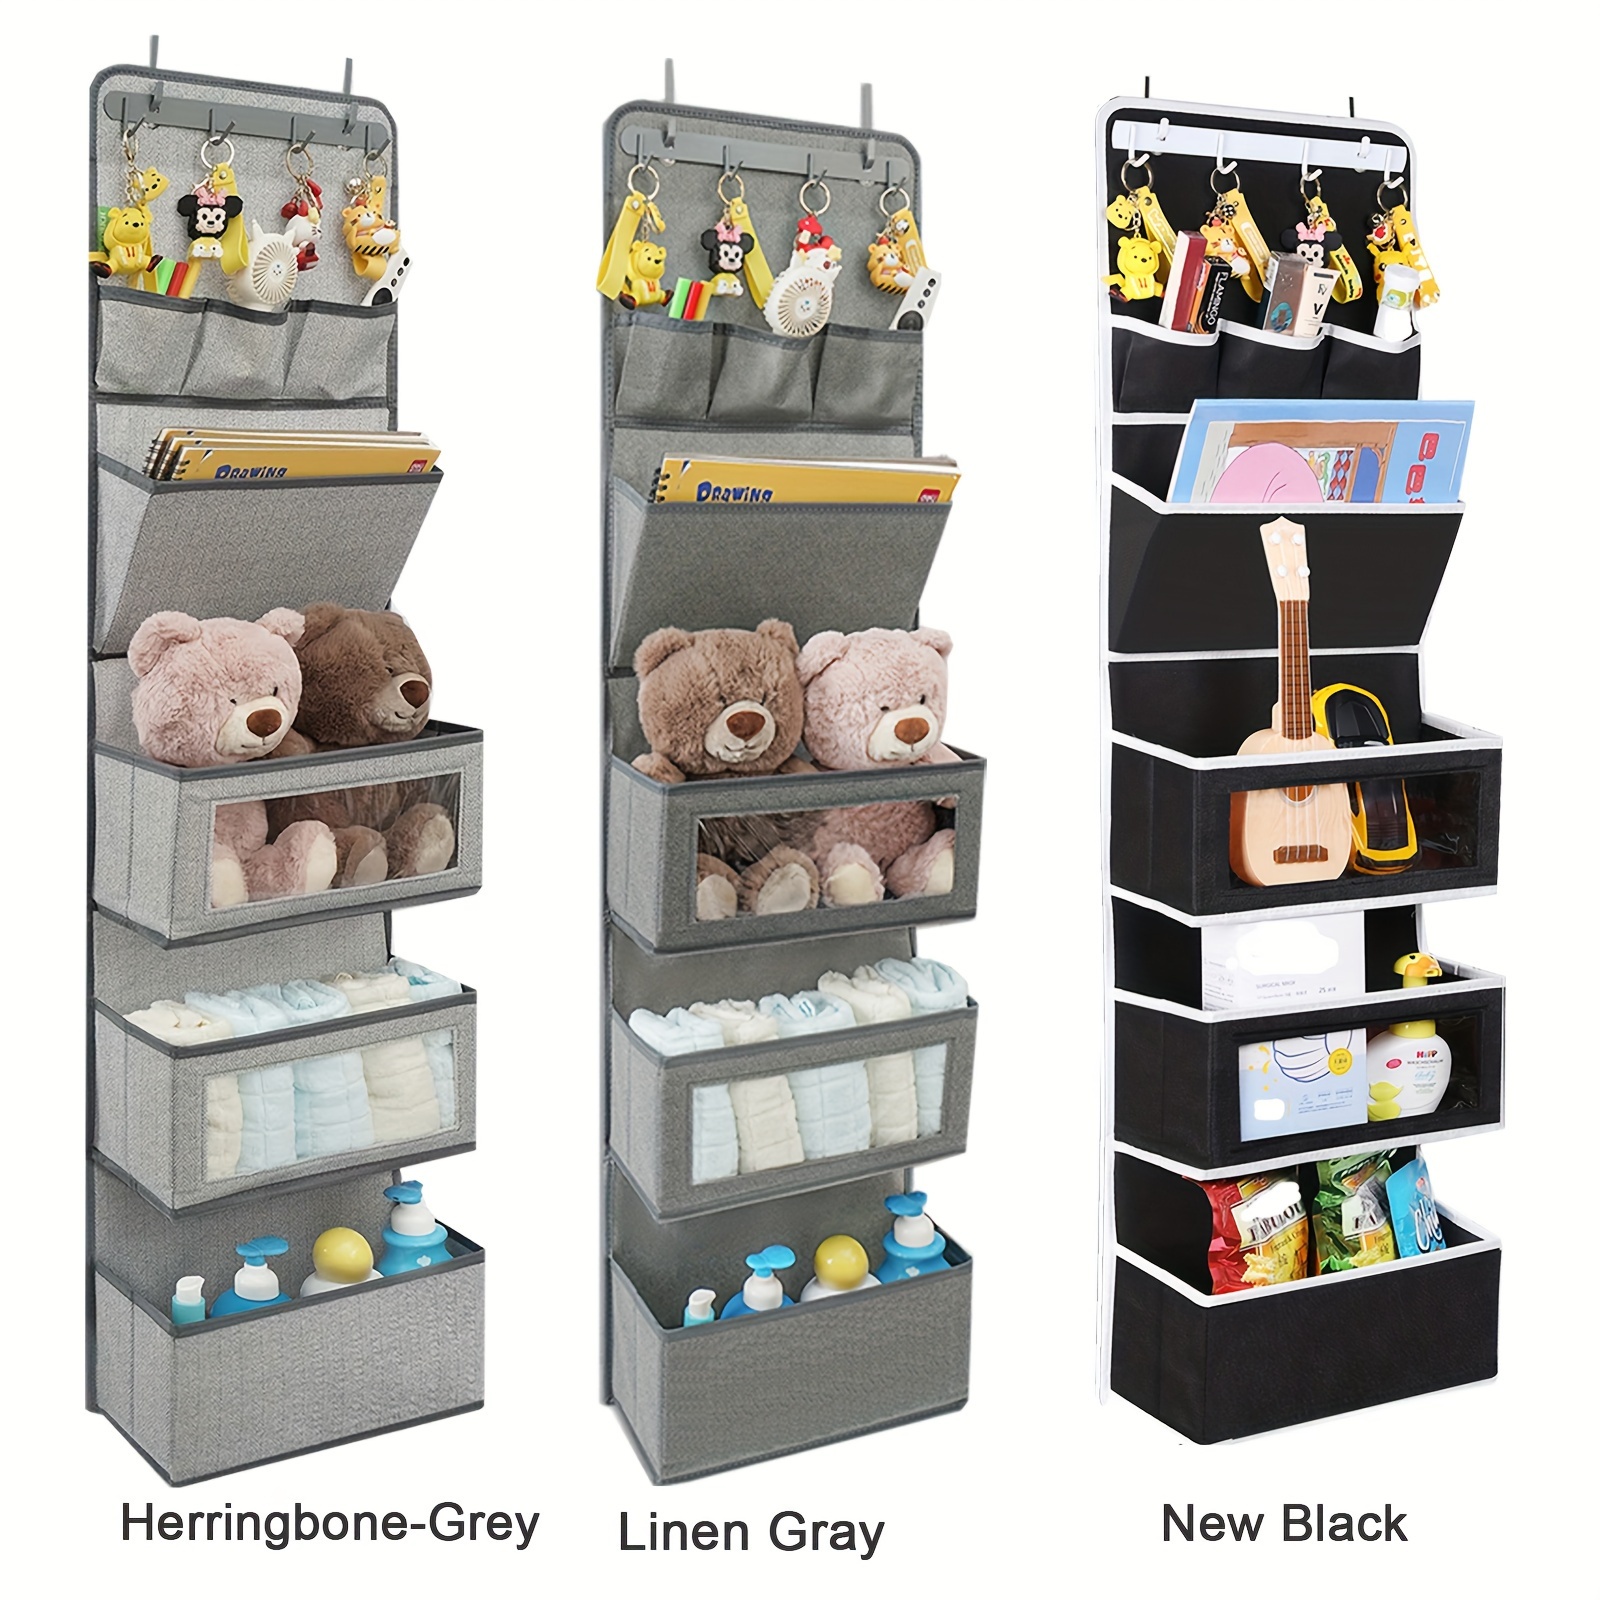 

All-in-one Over The Door Organizer, Super Behind The Door Storage Organizer With Door Rack And Large Clear Windows, Wall File Organizer, Hanging Organizer